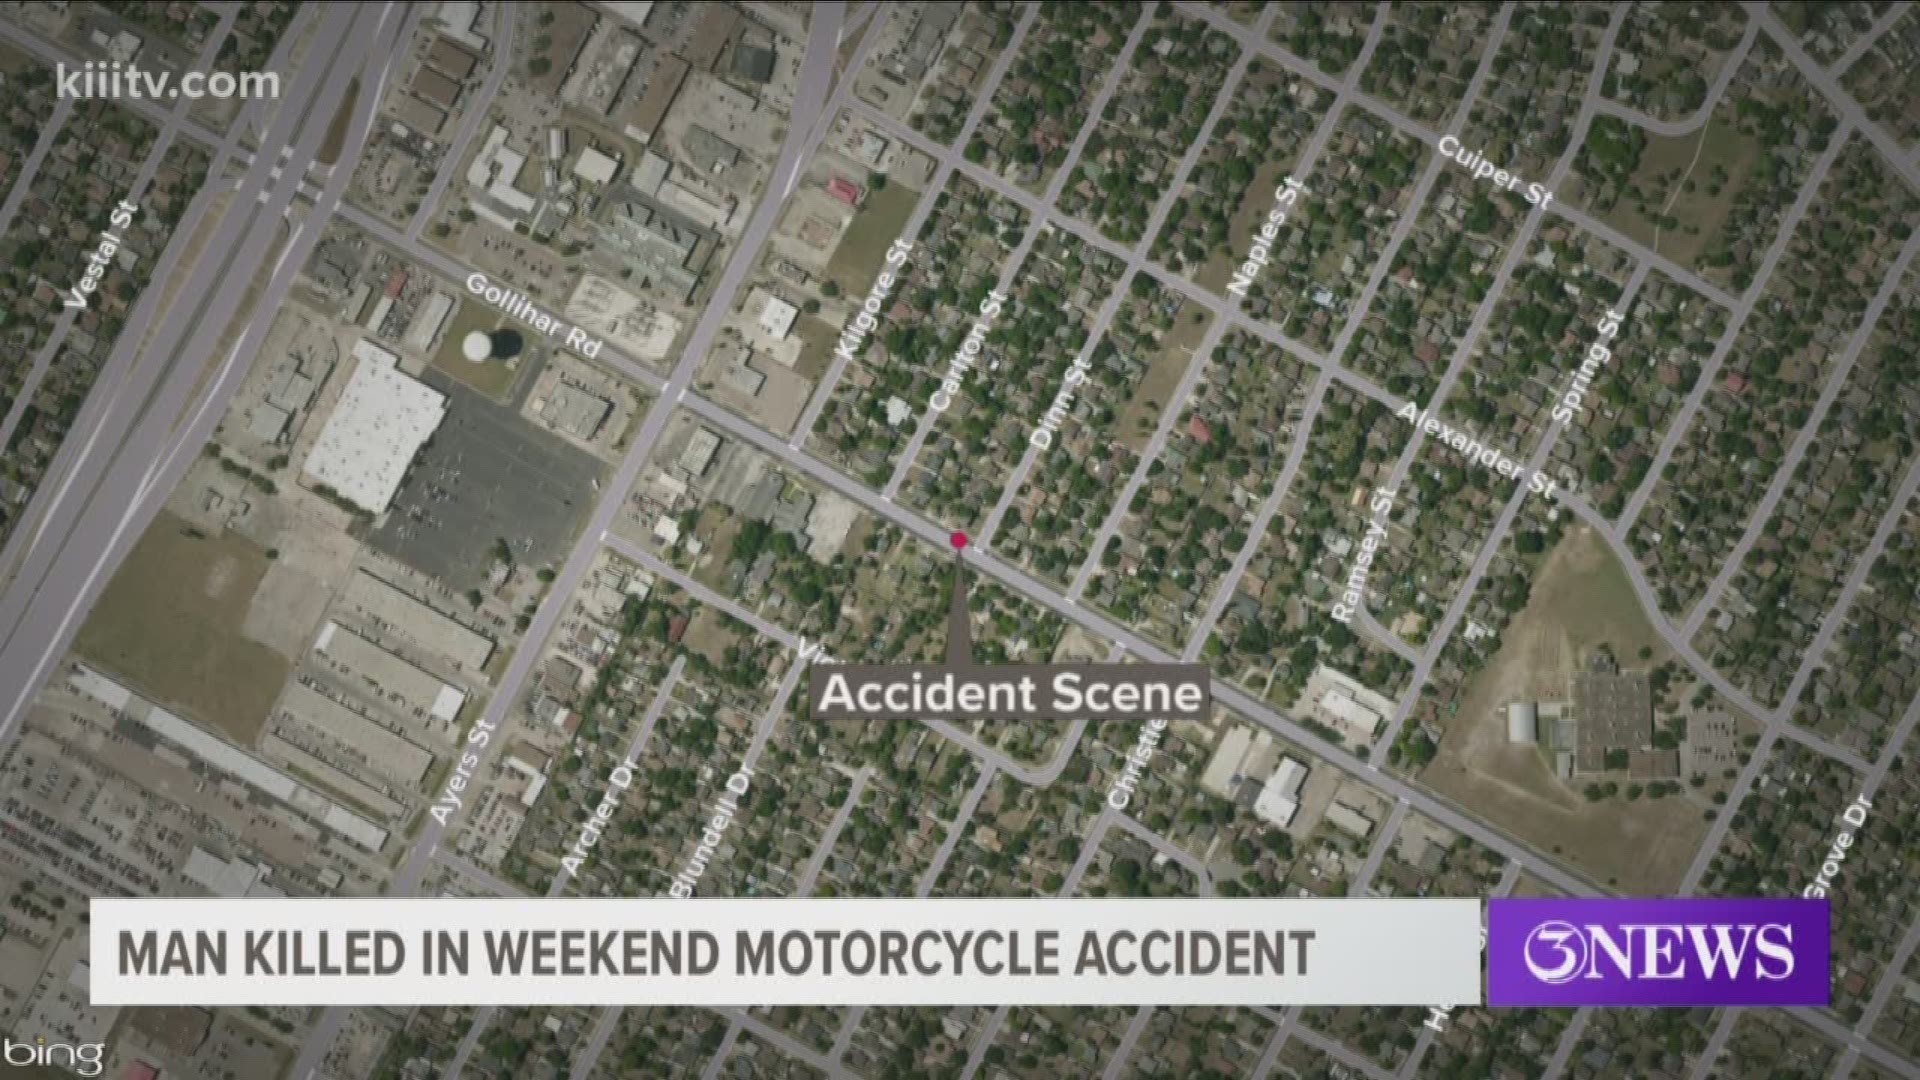 A man is facing charges of intoxication manslaughter following an accident Saturday morning that left one motorcyclist dead on the 2500 block of Gollihar.